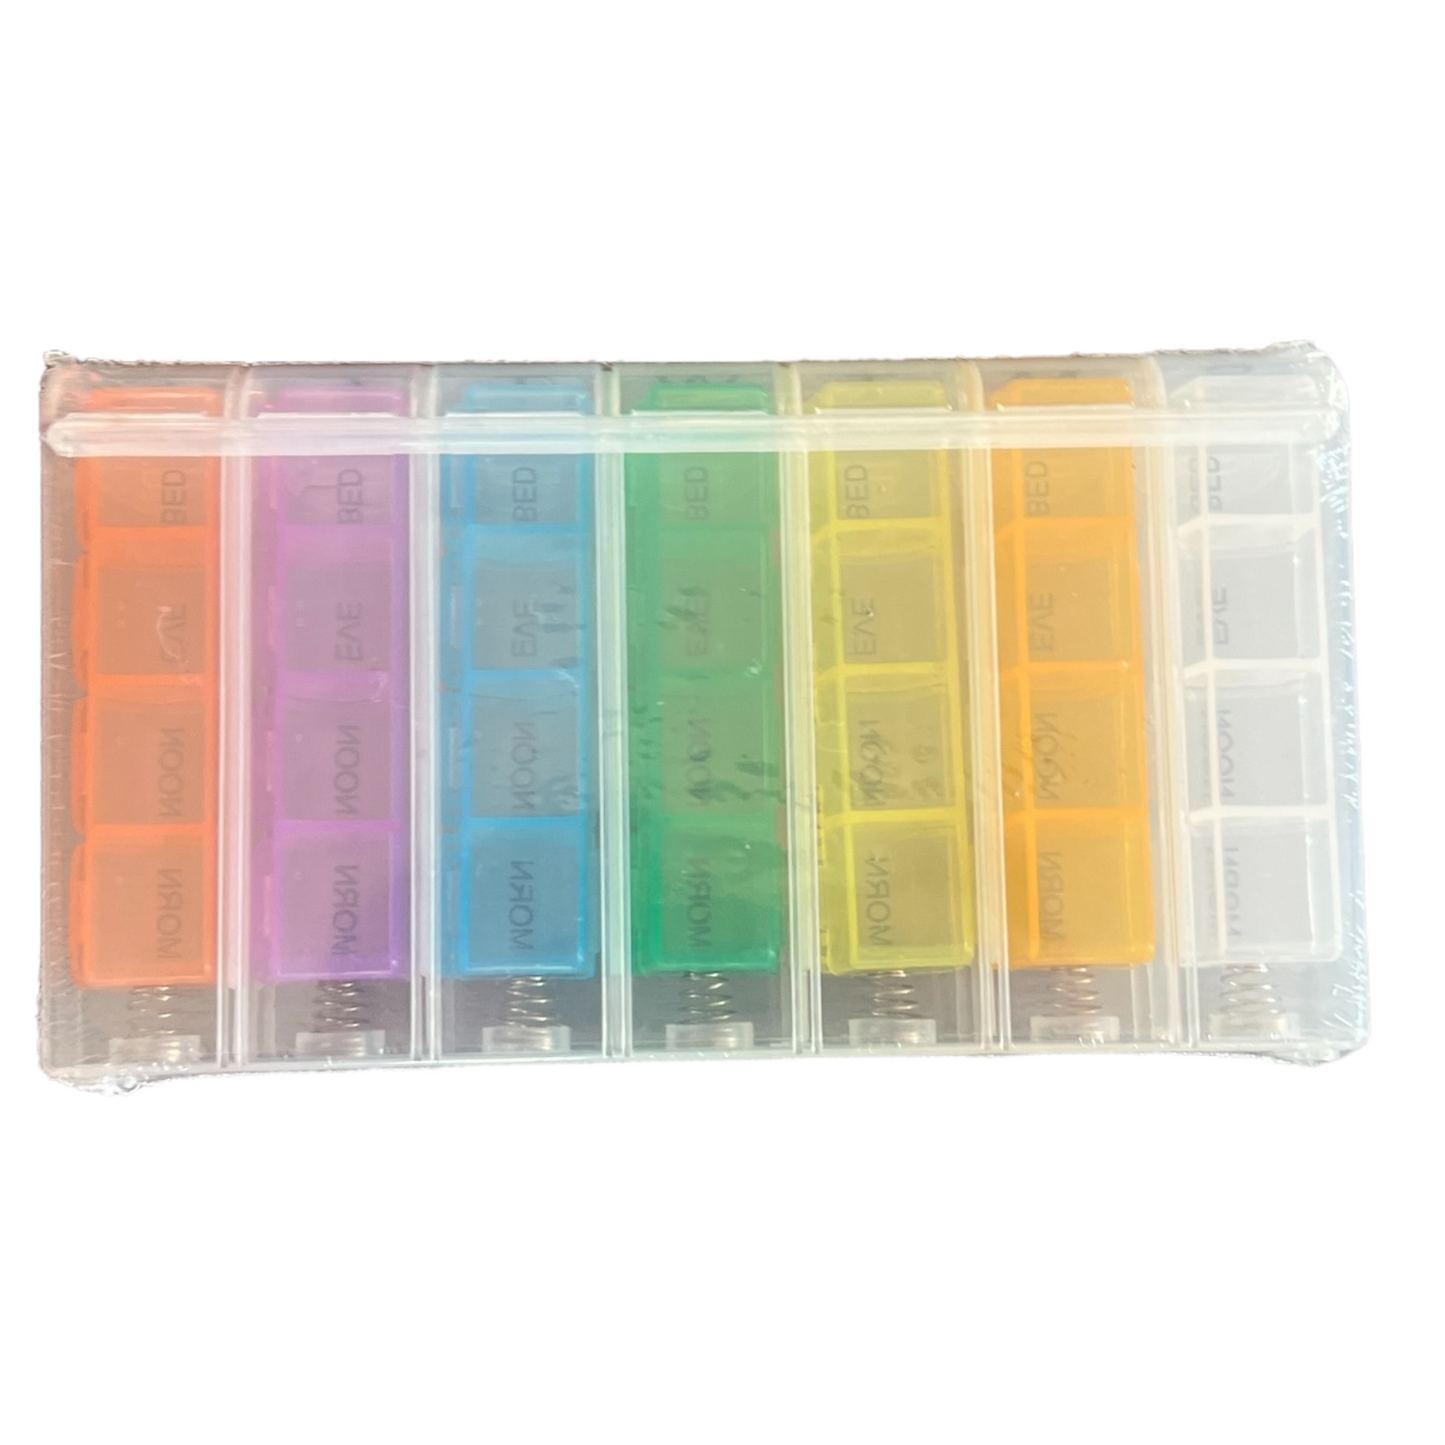 7 Day Pill Box — 4 Doses Daily Pop Out Case Managing Medications SPIRIT SPARKPLUGS   